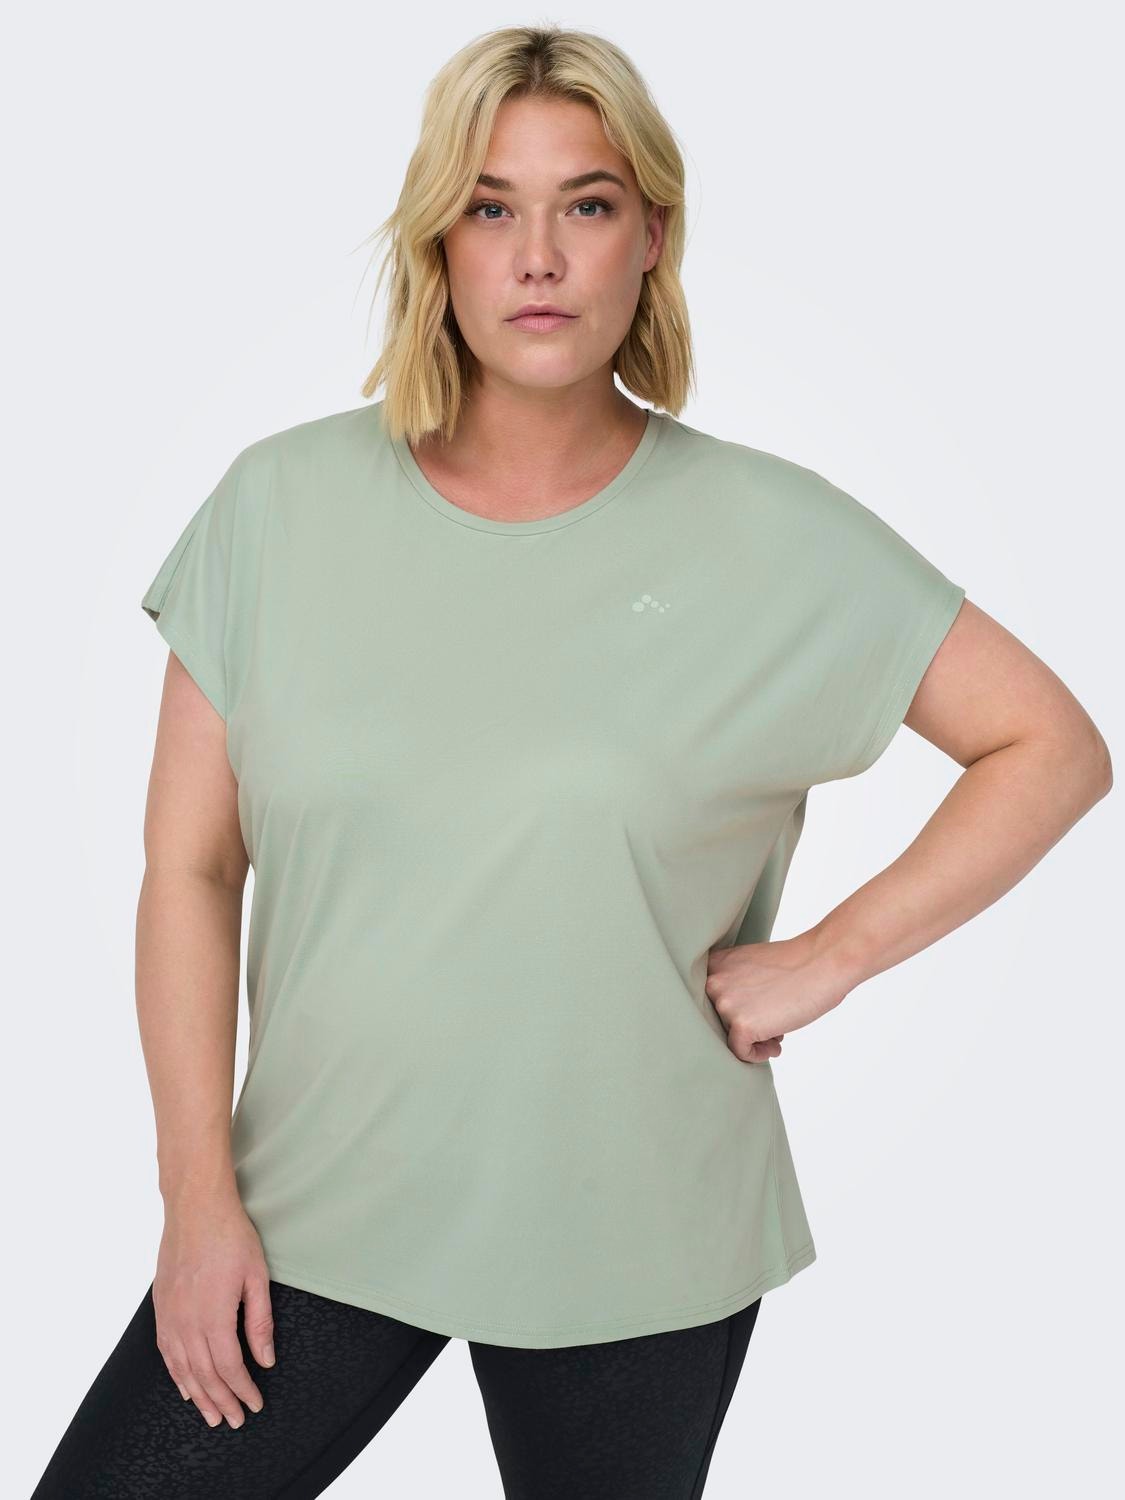 ONLY Loose fit O-hals Curve T-shirts -Frosty Green - 15185301